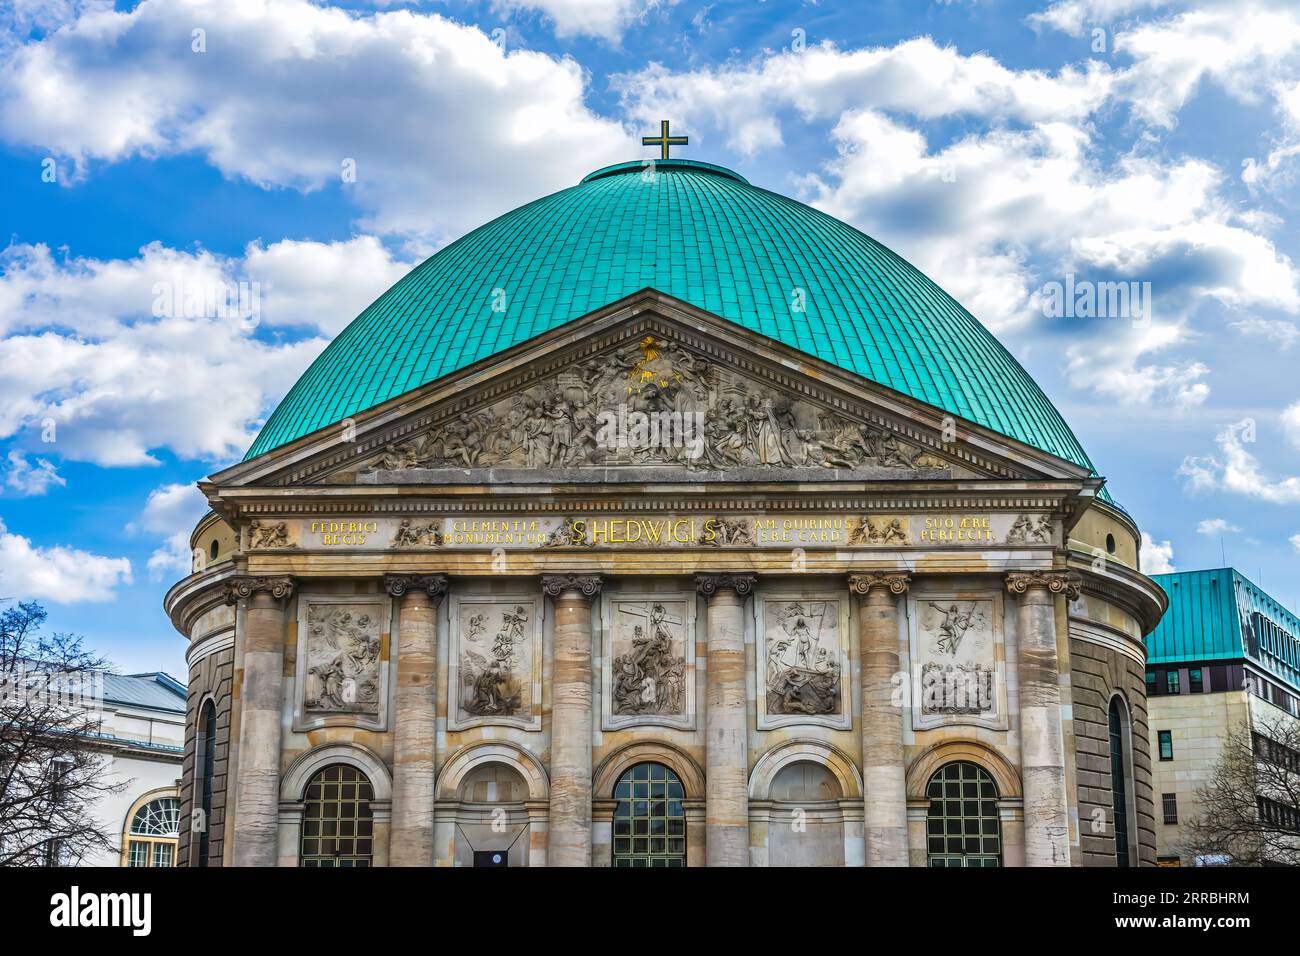 Saint Hedwig's Catholic Cathedral Berlin Germany. Built in late 1700s and 1800s. First Post Reformation Catholic Church in Prussia. Modeled After Roma Stock Photo